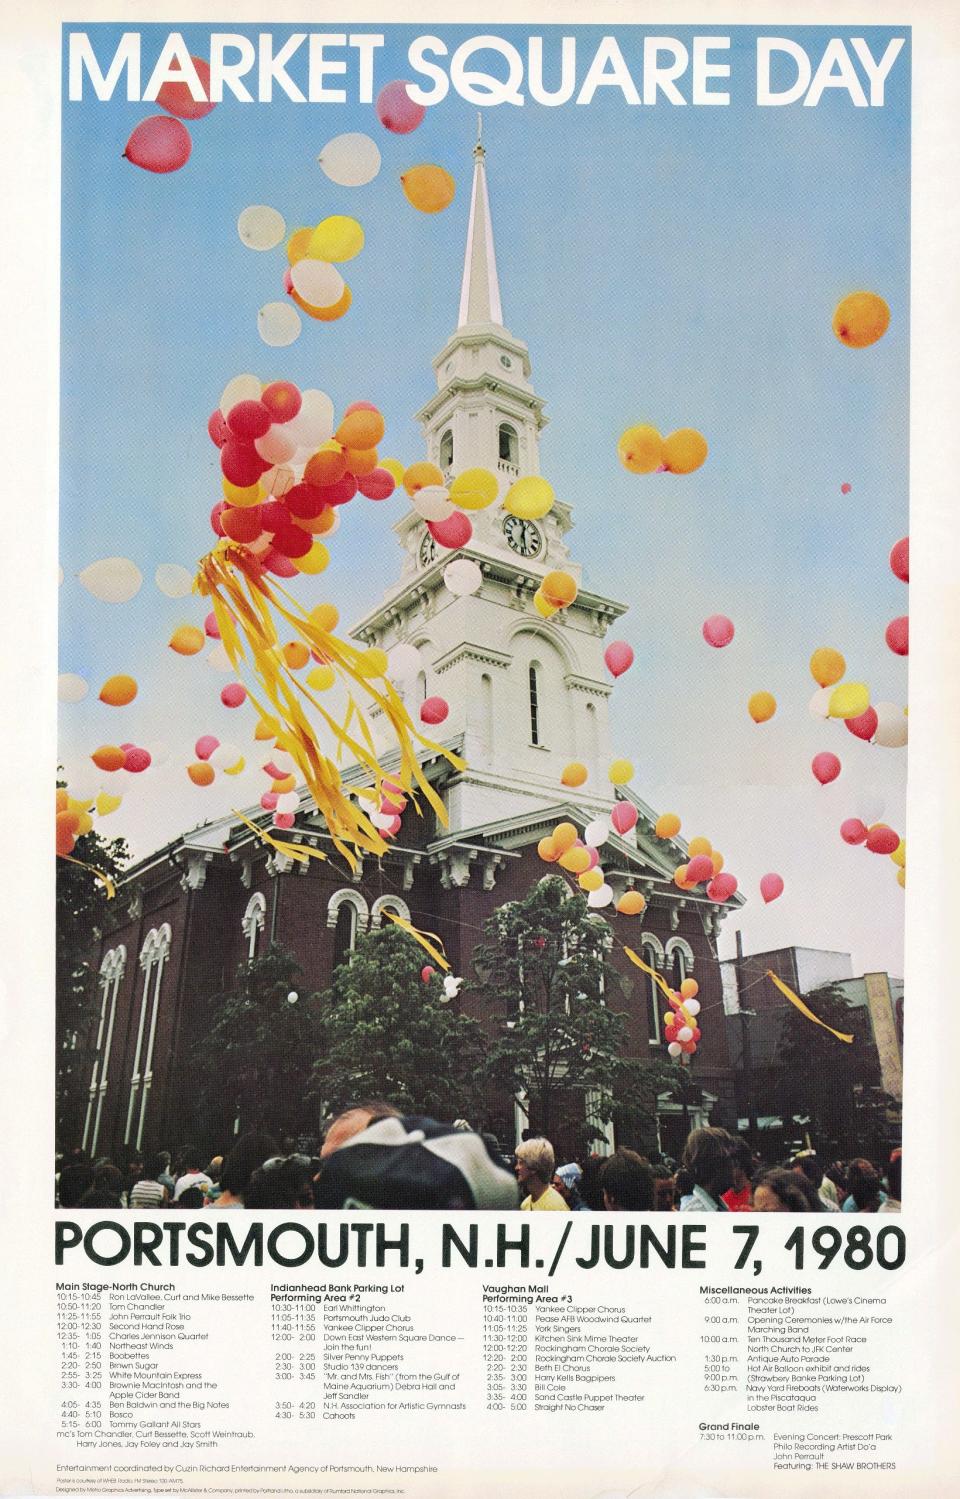 Balloons became a signature emblem of Market Square Day starting with the first festival in 1978. This poster in the Portsmouth Athenaeum archives shows the lineup of events for the 1980 celebration.